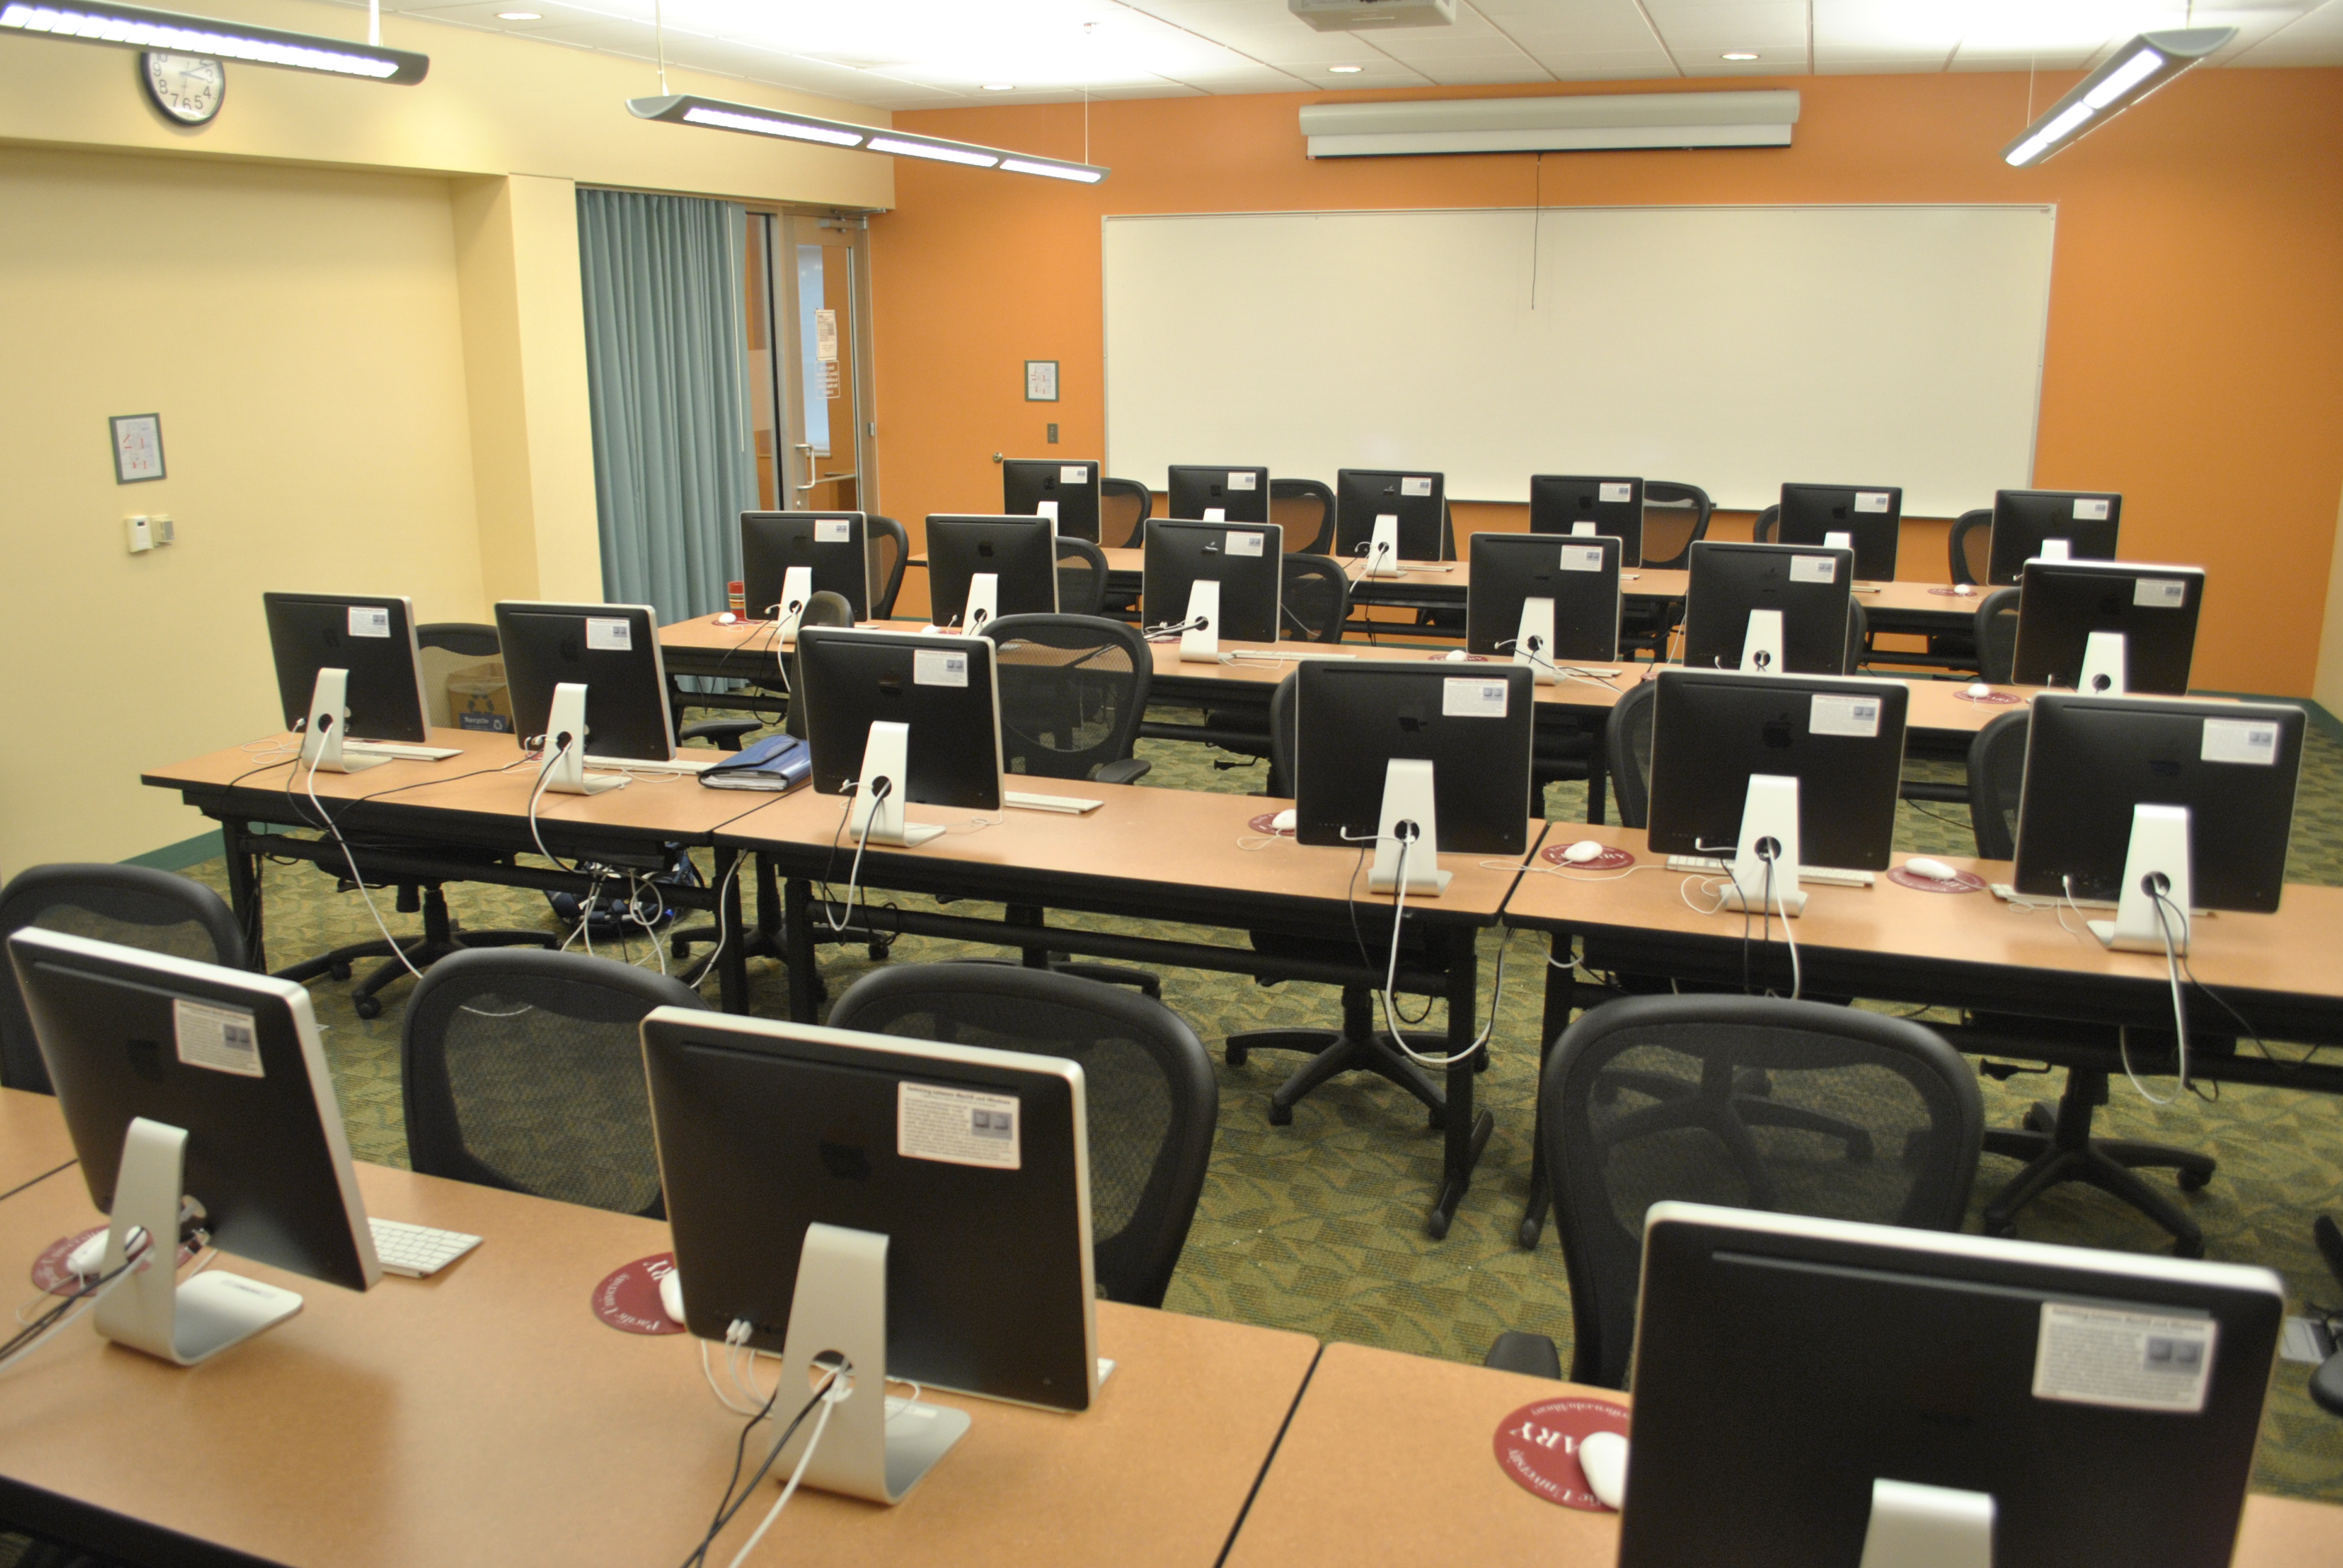 Apple computers are lined up on long desks. There are four rows of tables with monitors. 